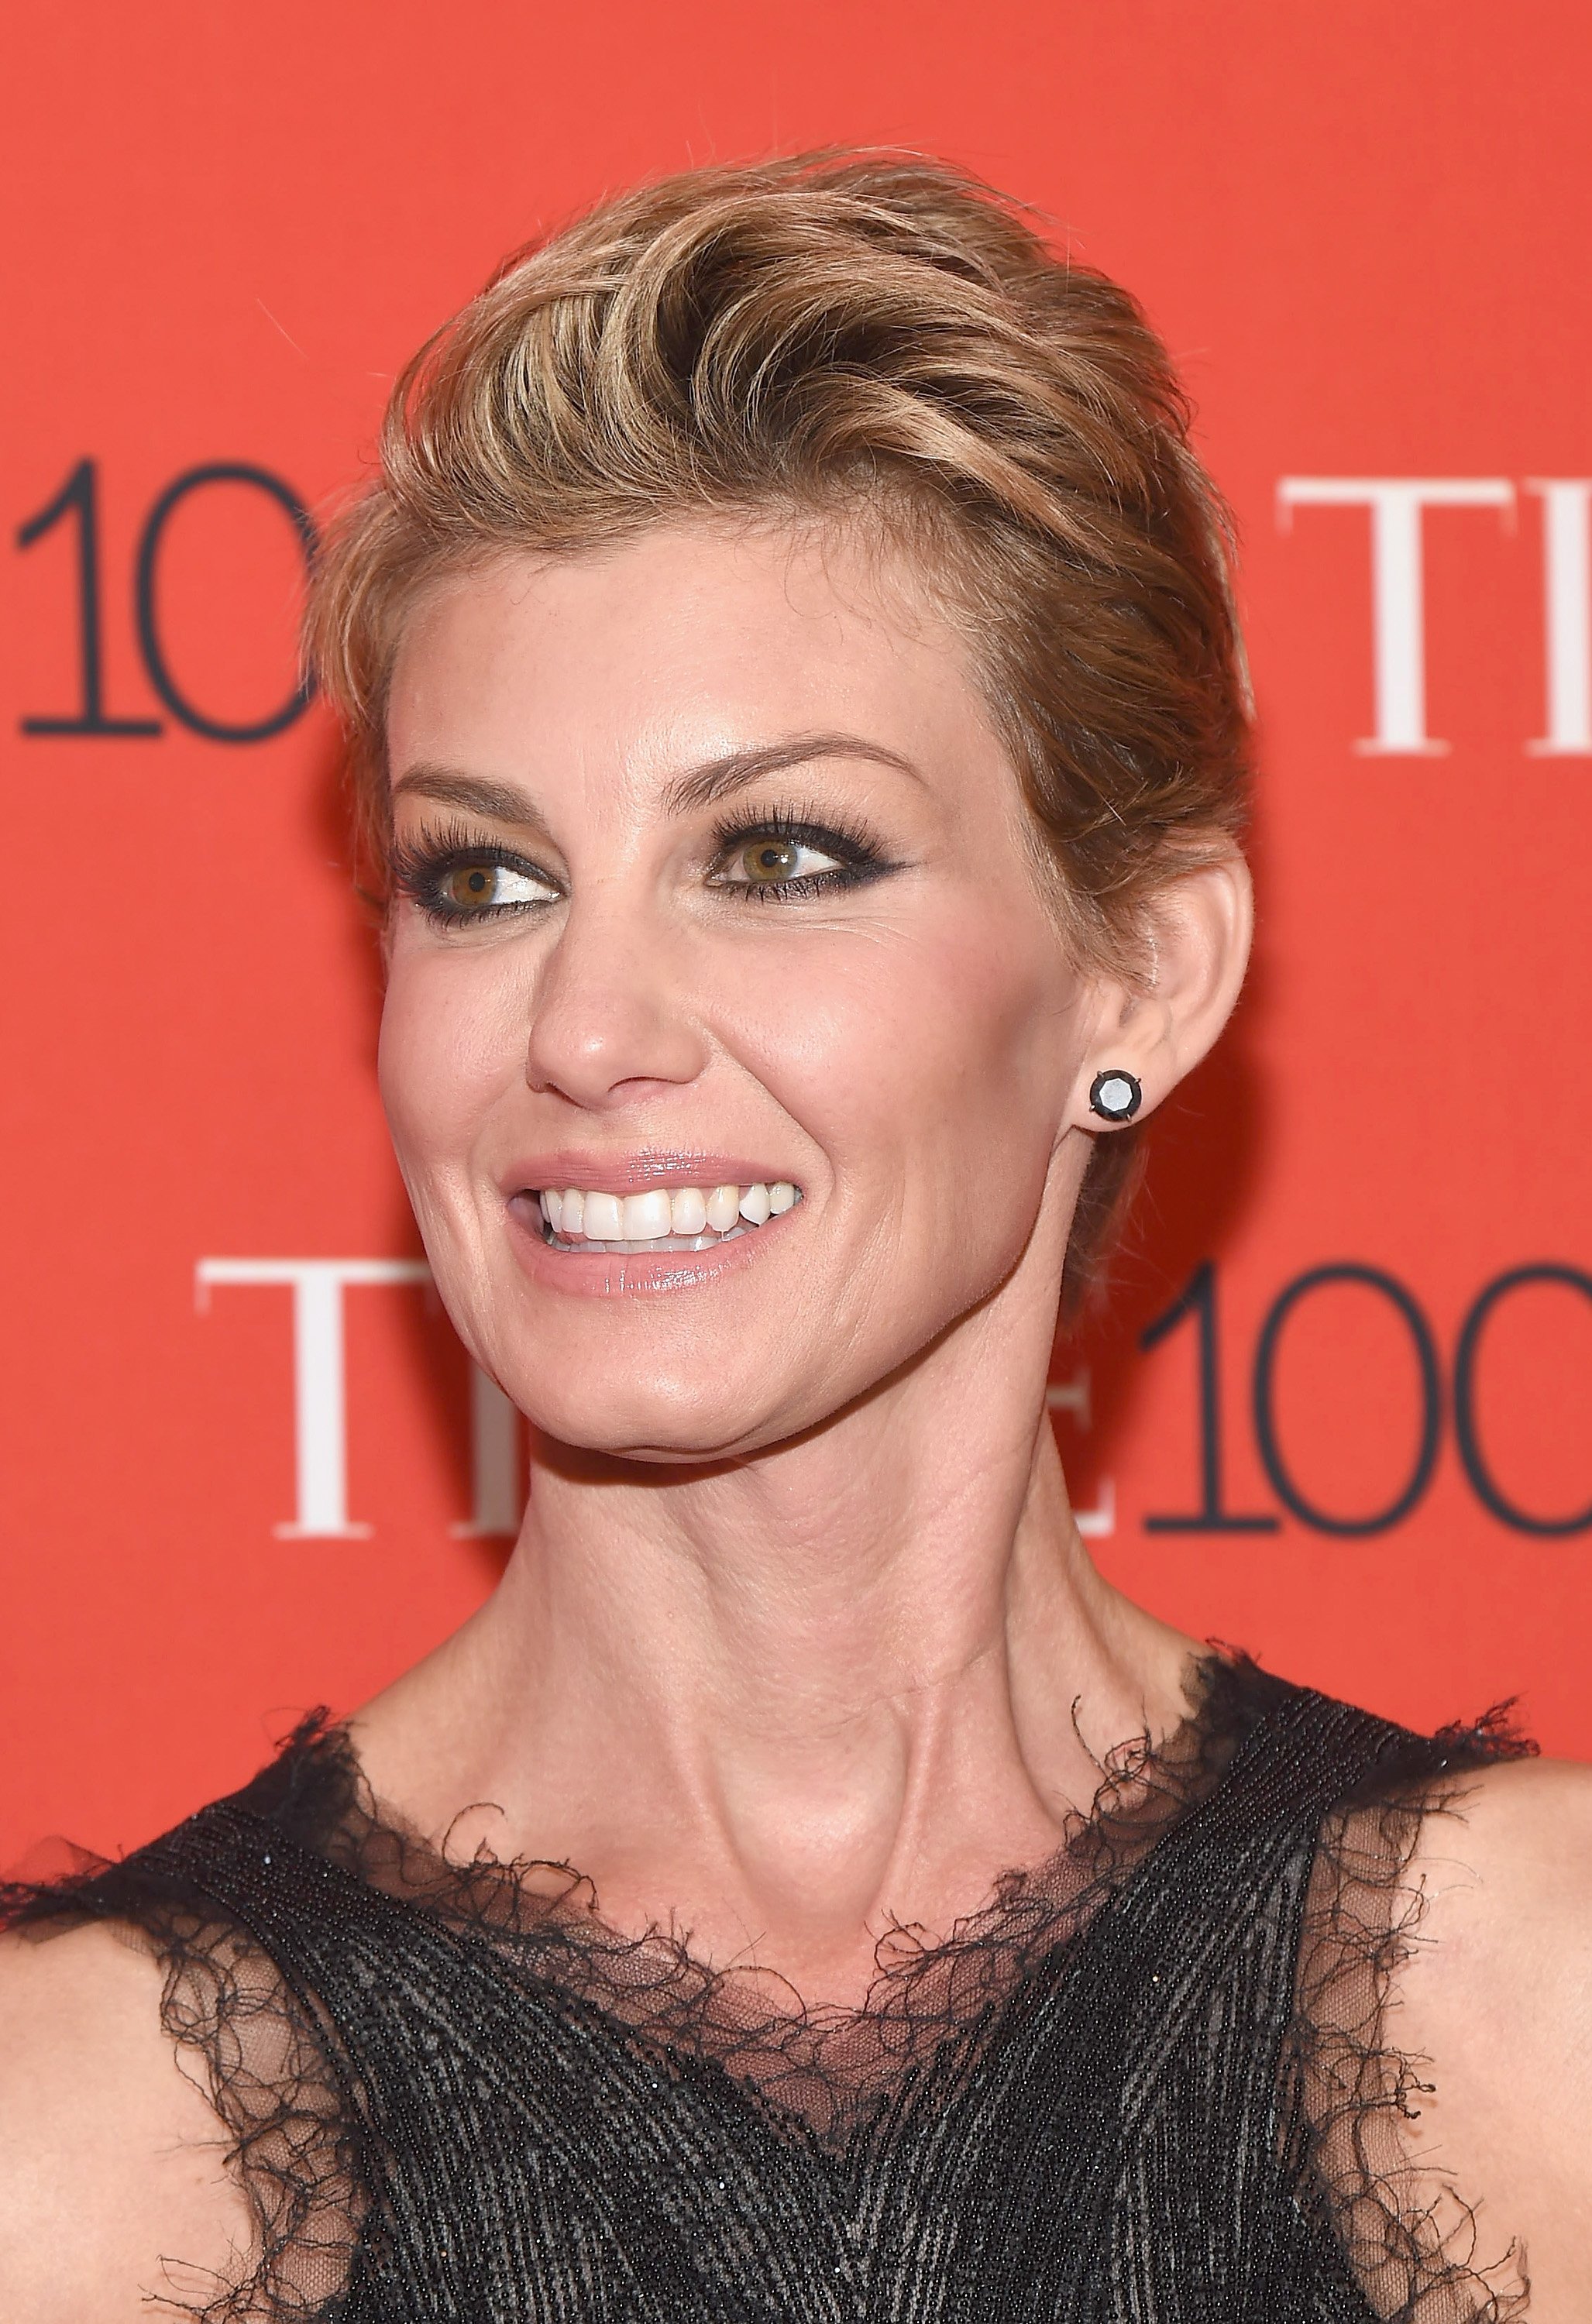 Singer Faith Hill attends TIME 100 Gala, TIME's 100 Most Influential People In The World at Frederick P. Rose Hall, Jazz at Lincoln Center on April 21, 2015 in New York City. | Source: Getty Images